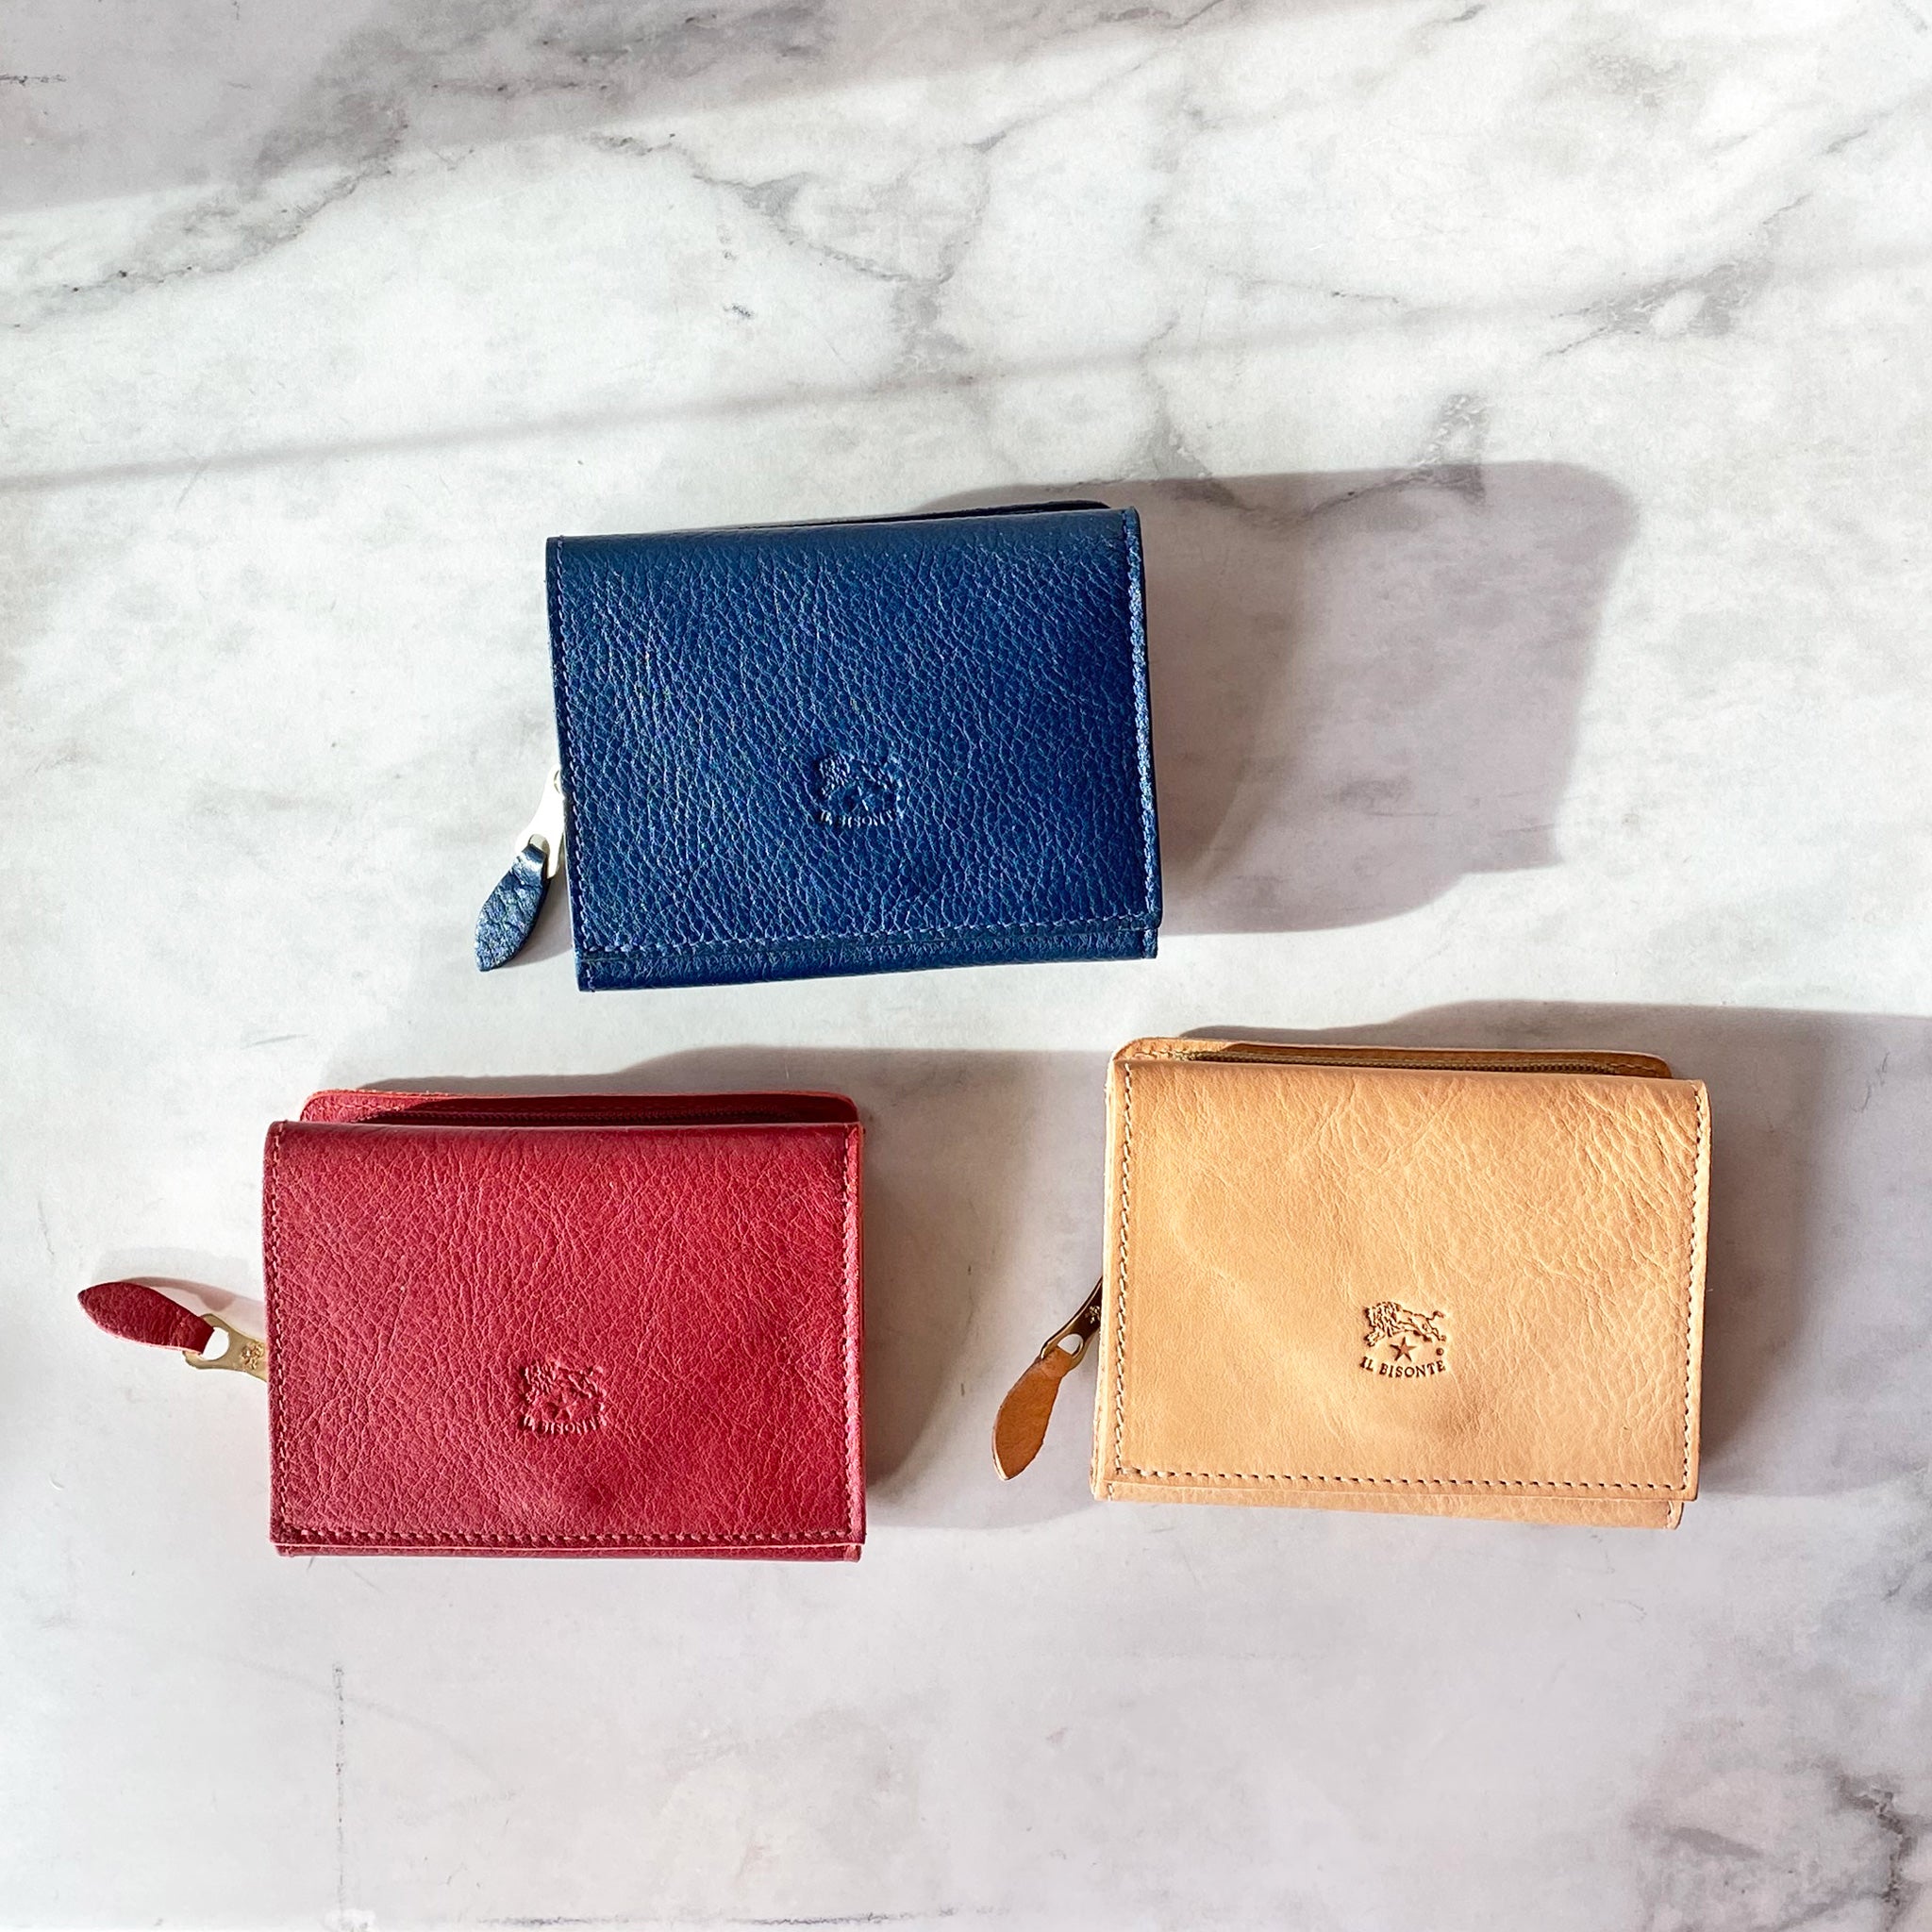 Il Bisonte Small Wallet w/Zip Coin purse – A Mano: Luxury artisan